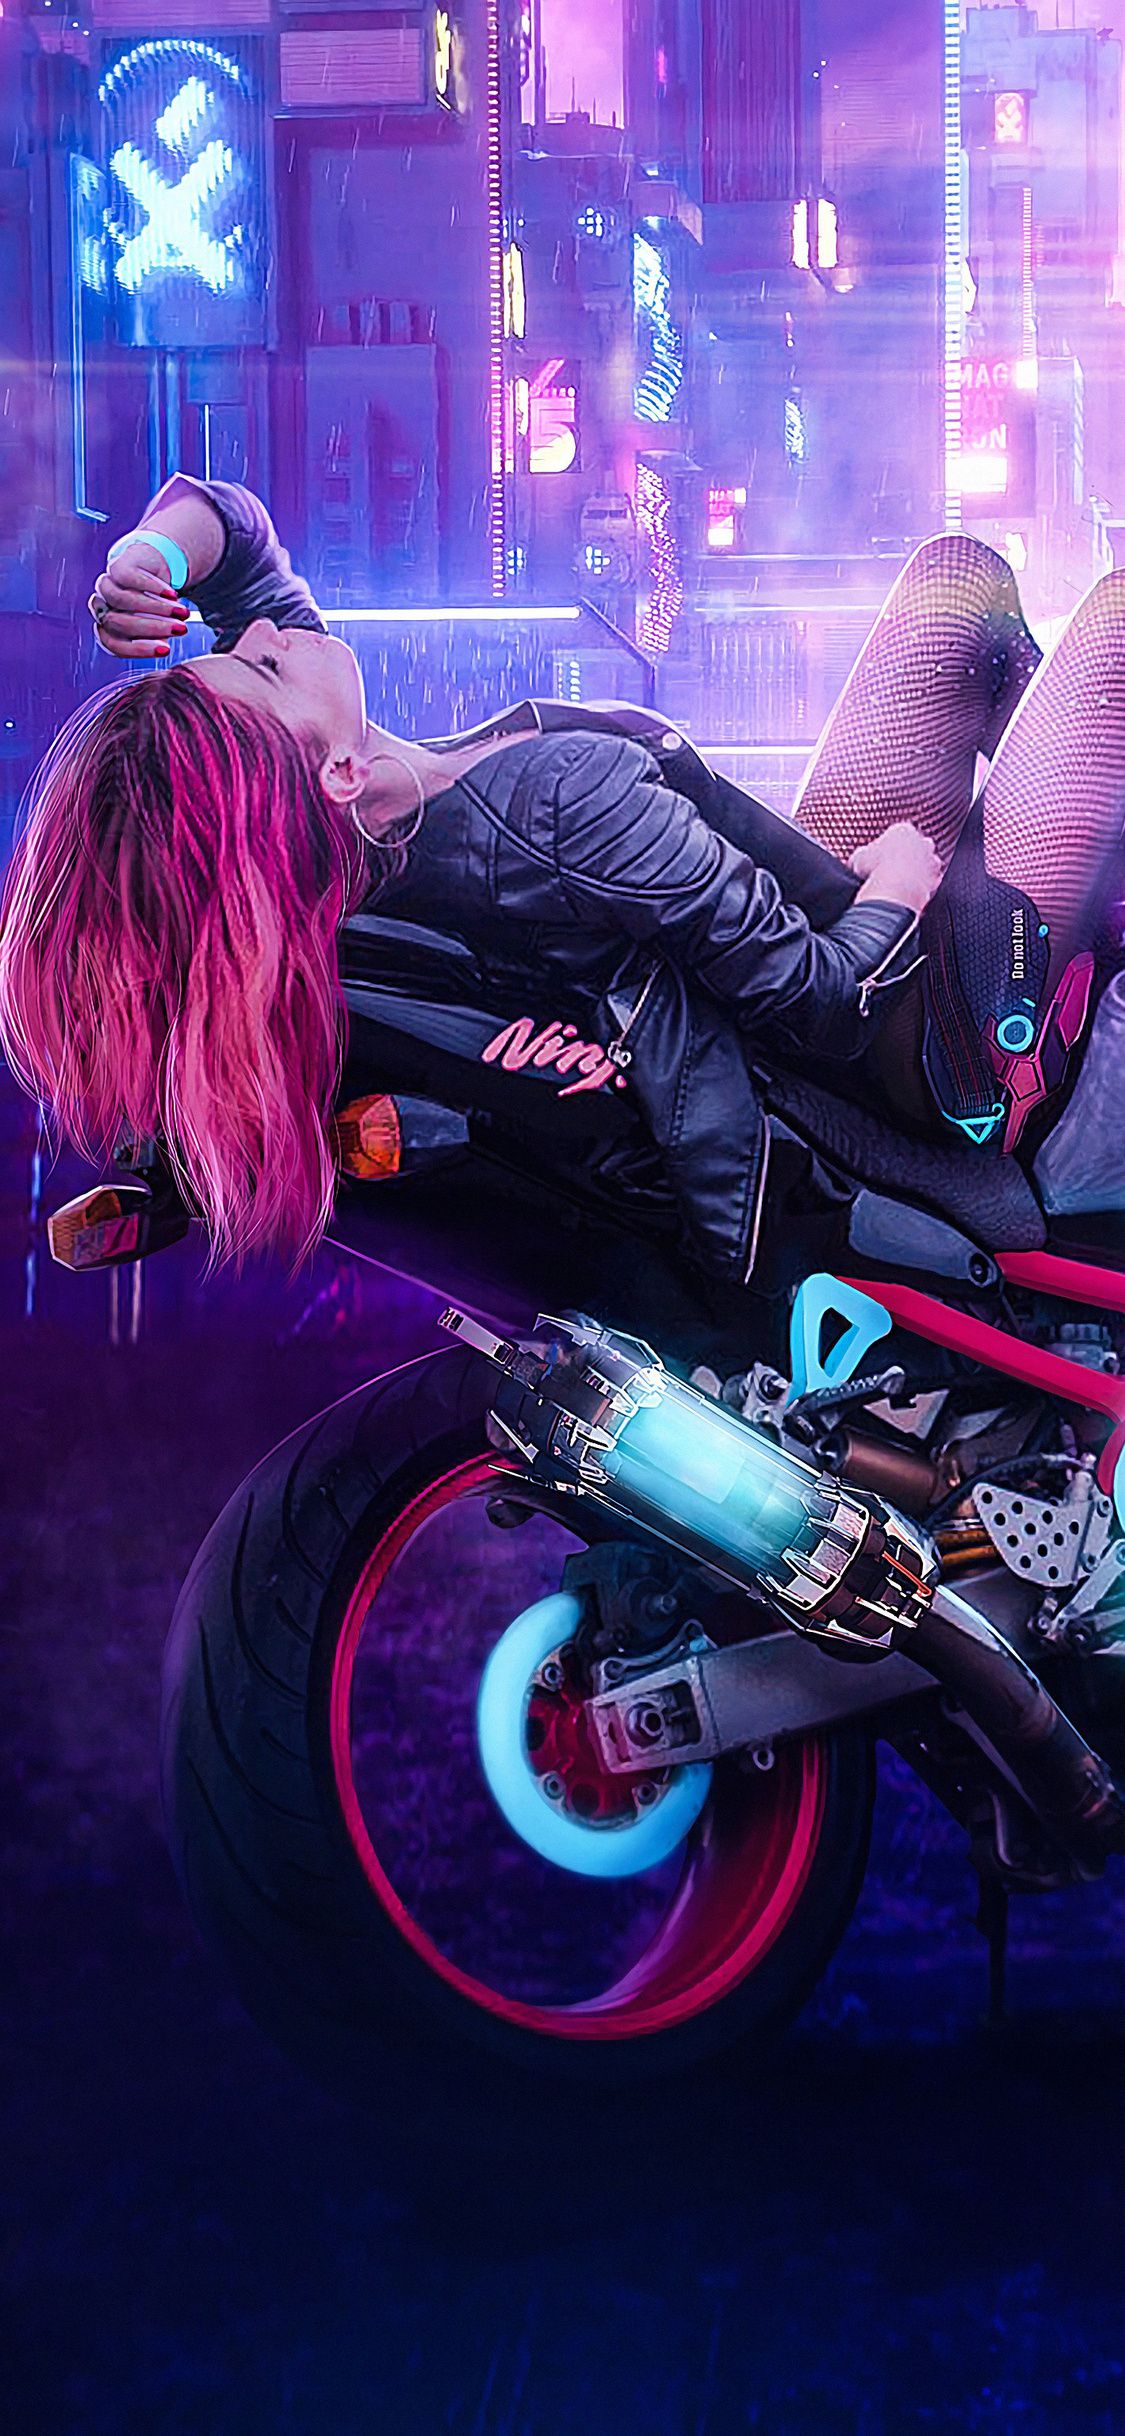 Cyberpunk Motorcycle iPhone X Wallpapers - Wallpaper Cave